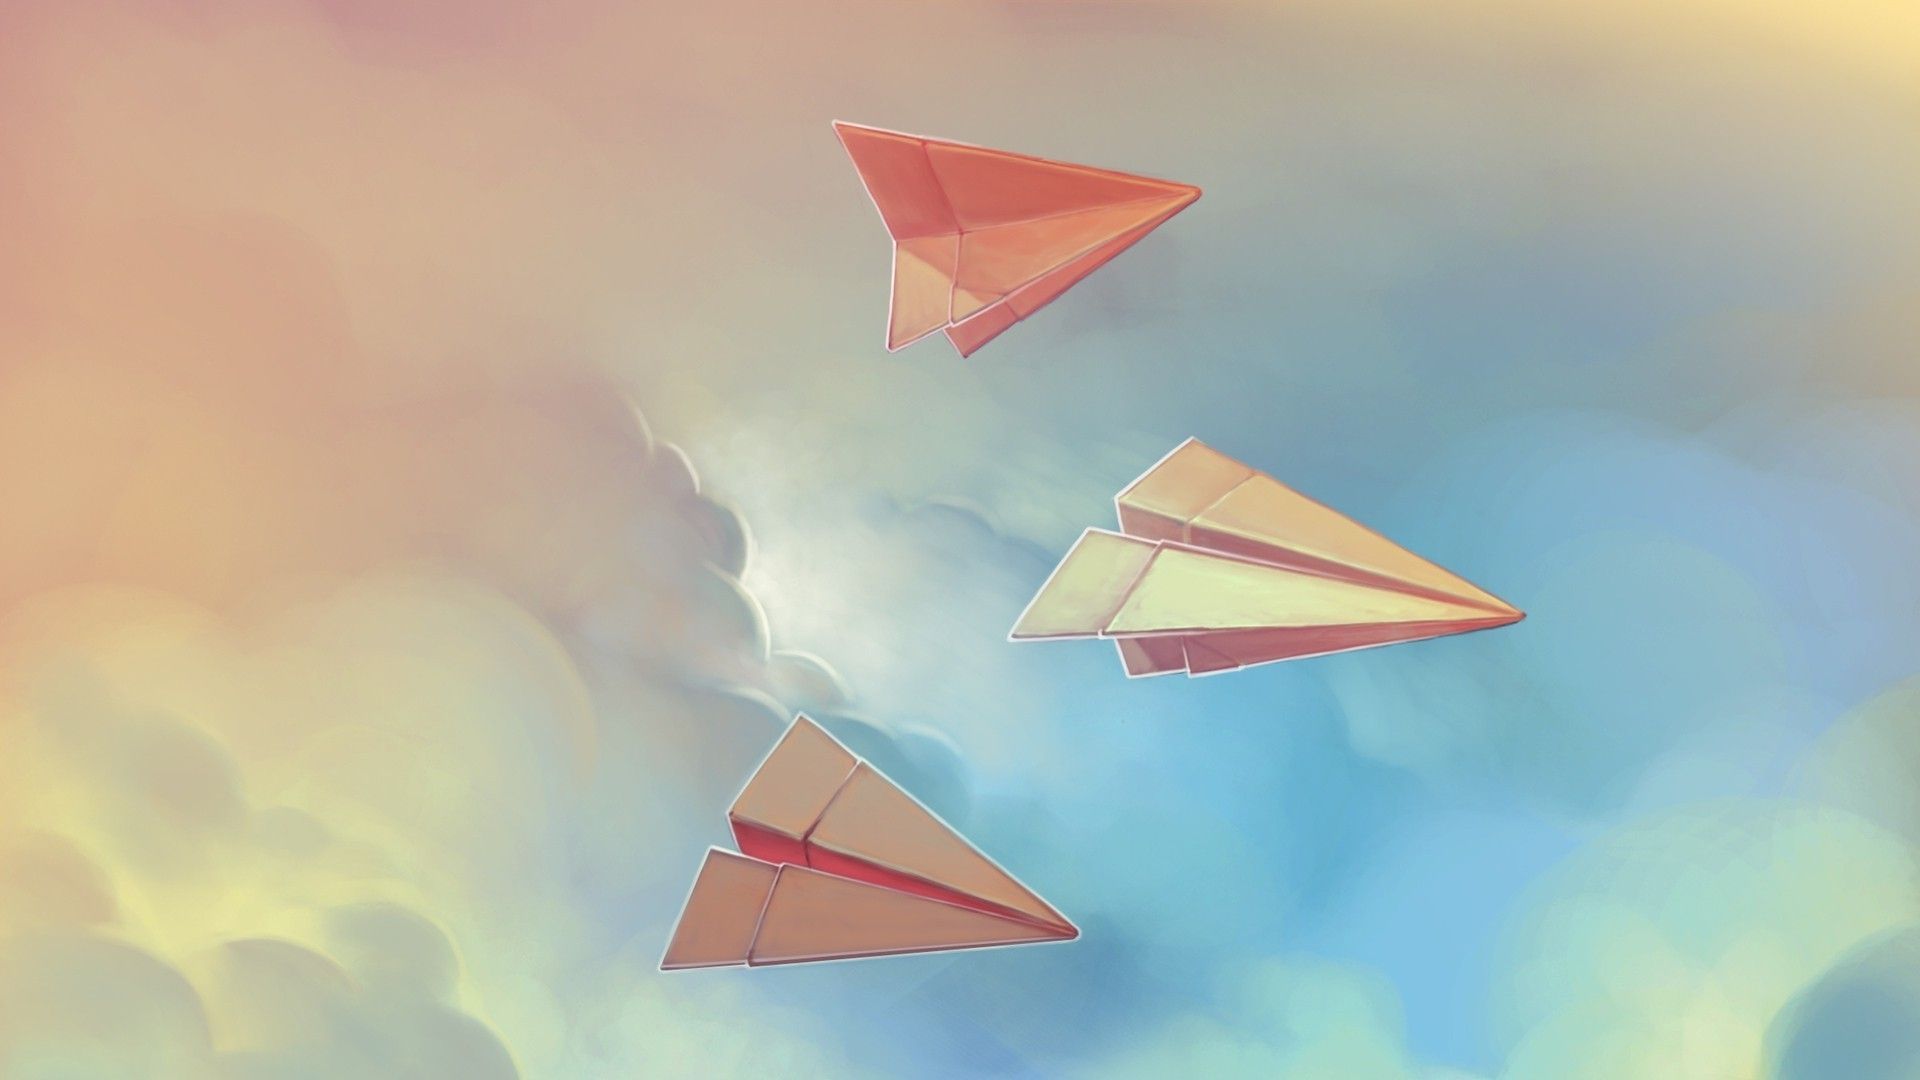 Gallery For > Paper Planes Wallpaper